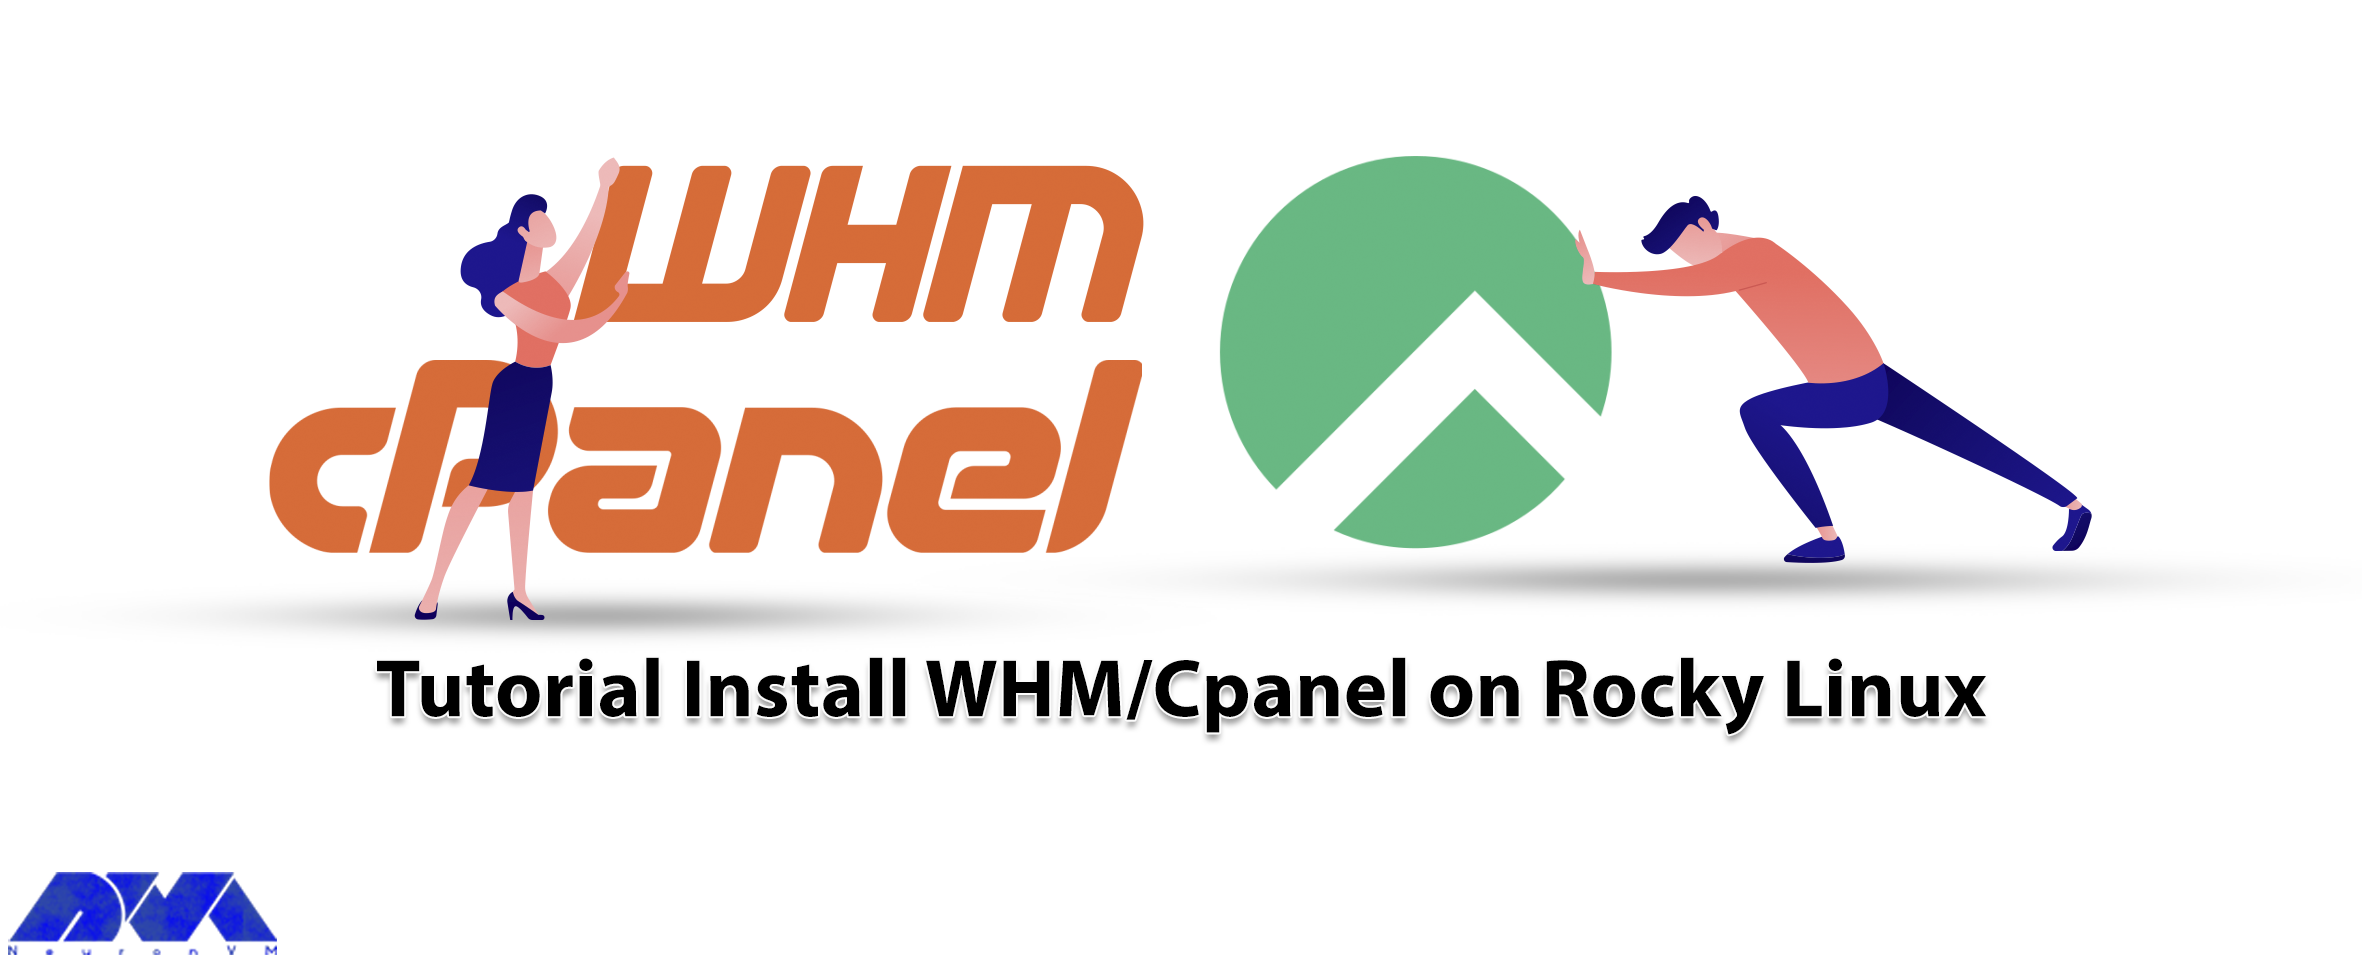 Tutorial Install WHM/Cpanel on Rocky Linux - NeuronVM